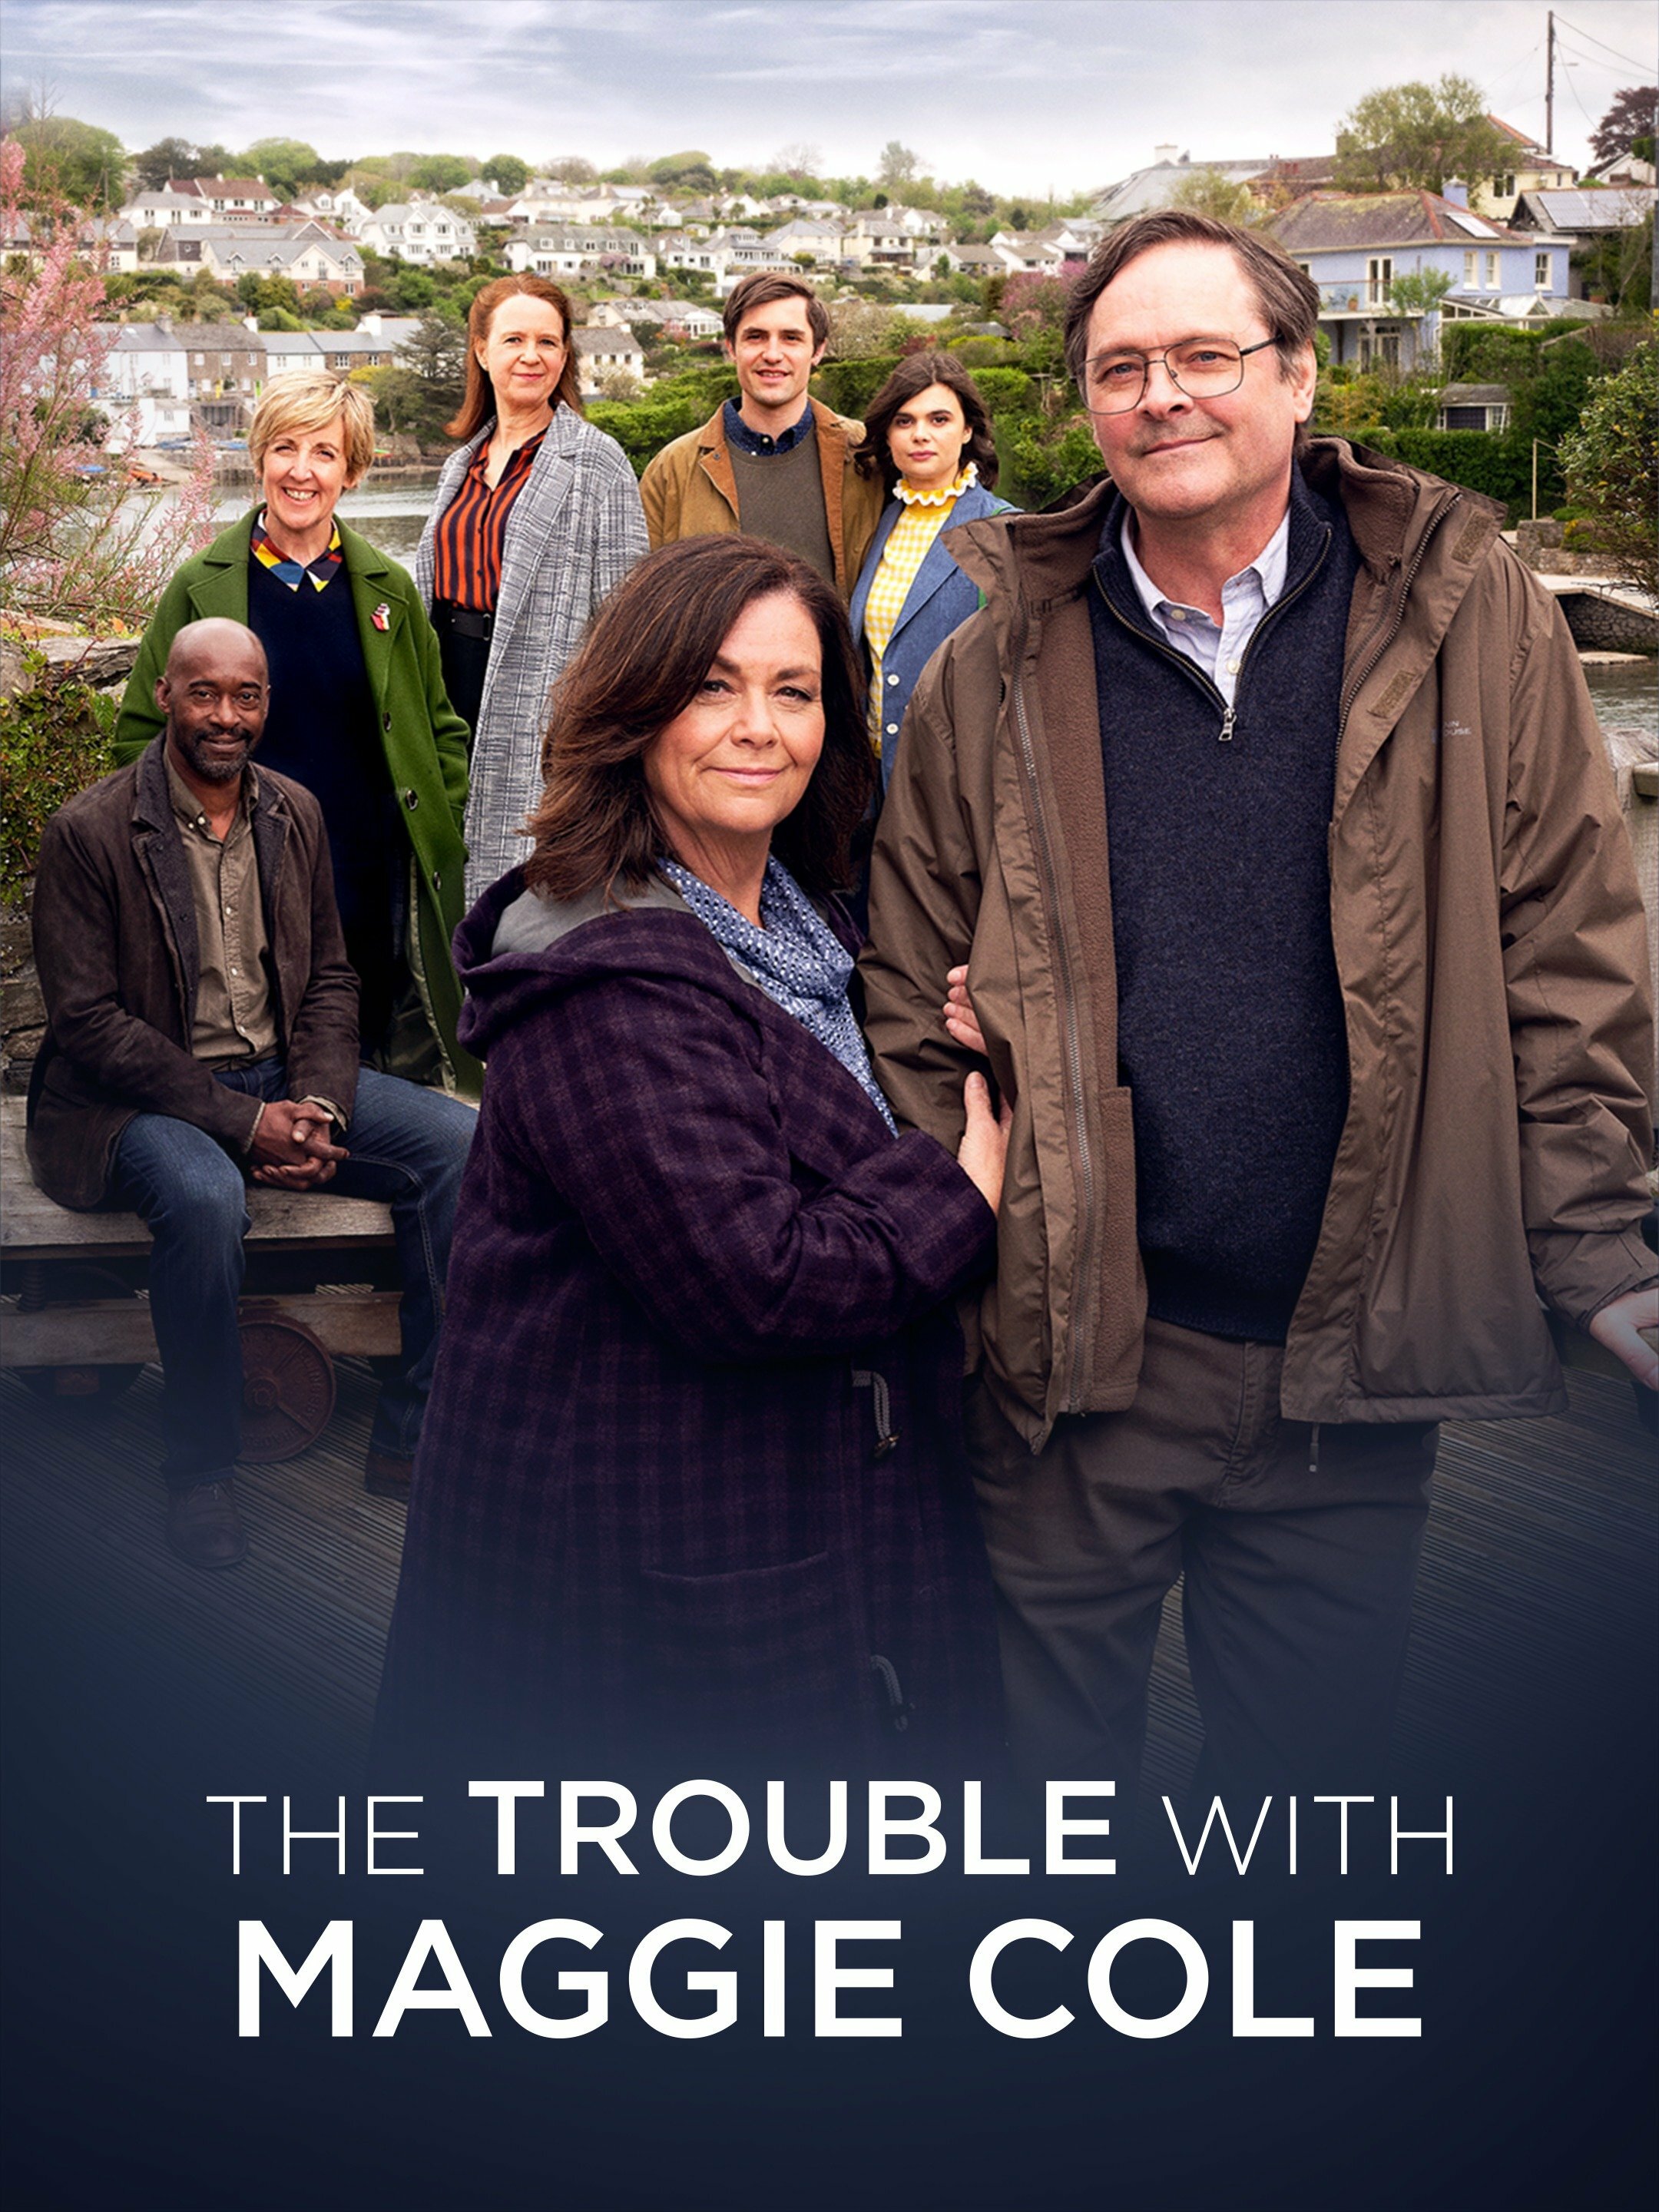 The Trouble with Maggie Cole ne zaman